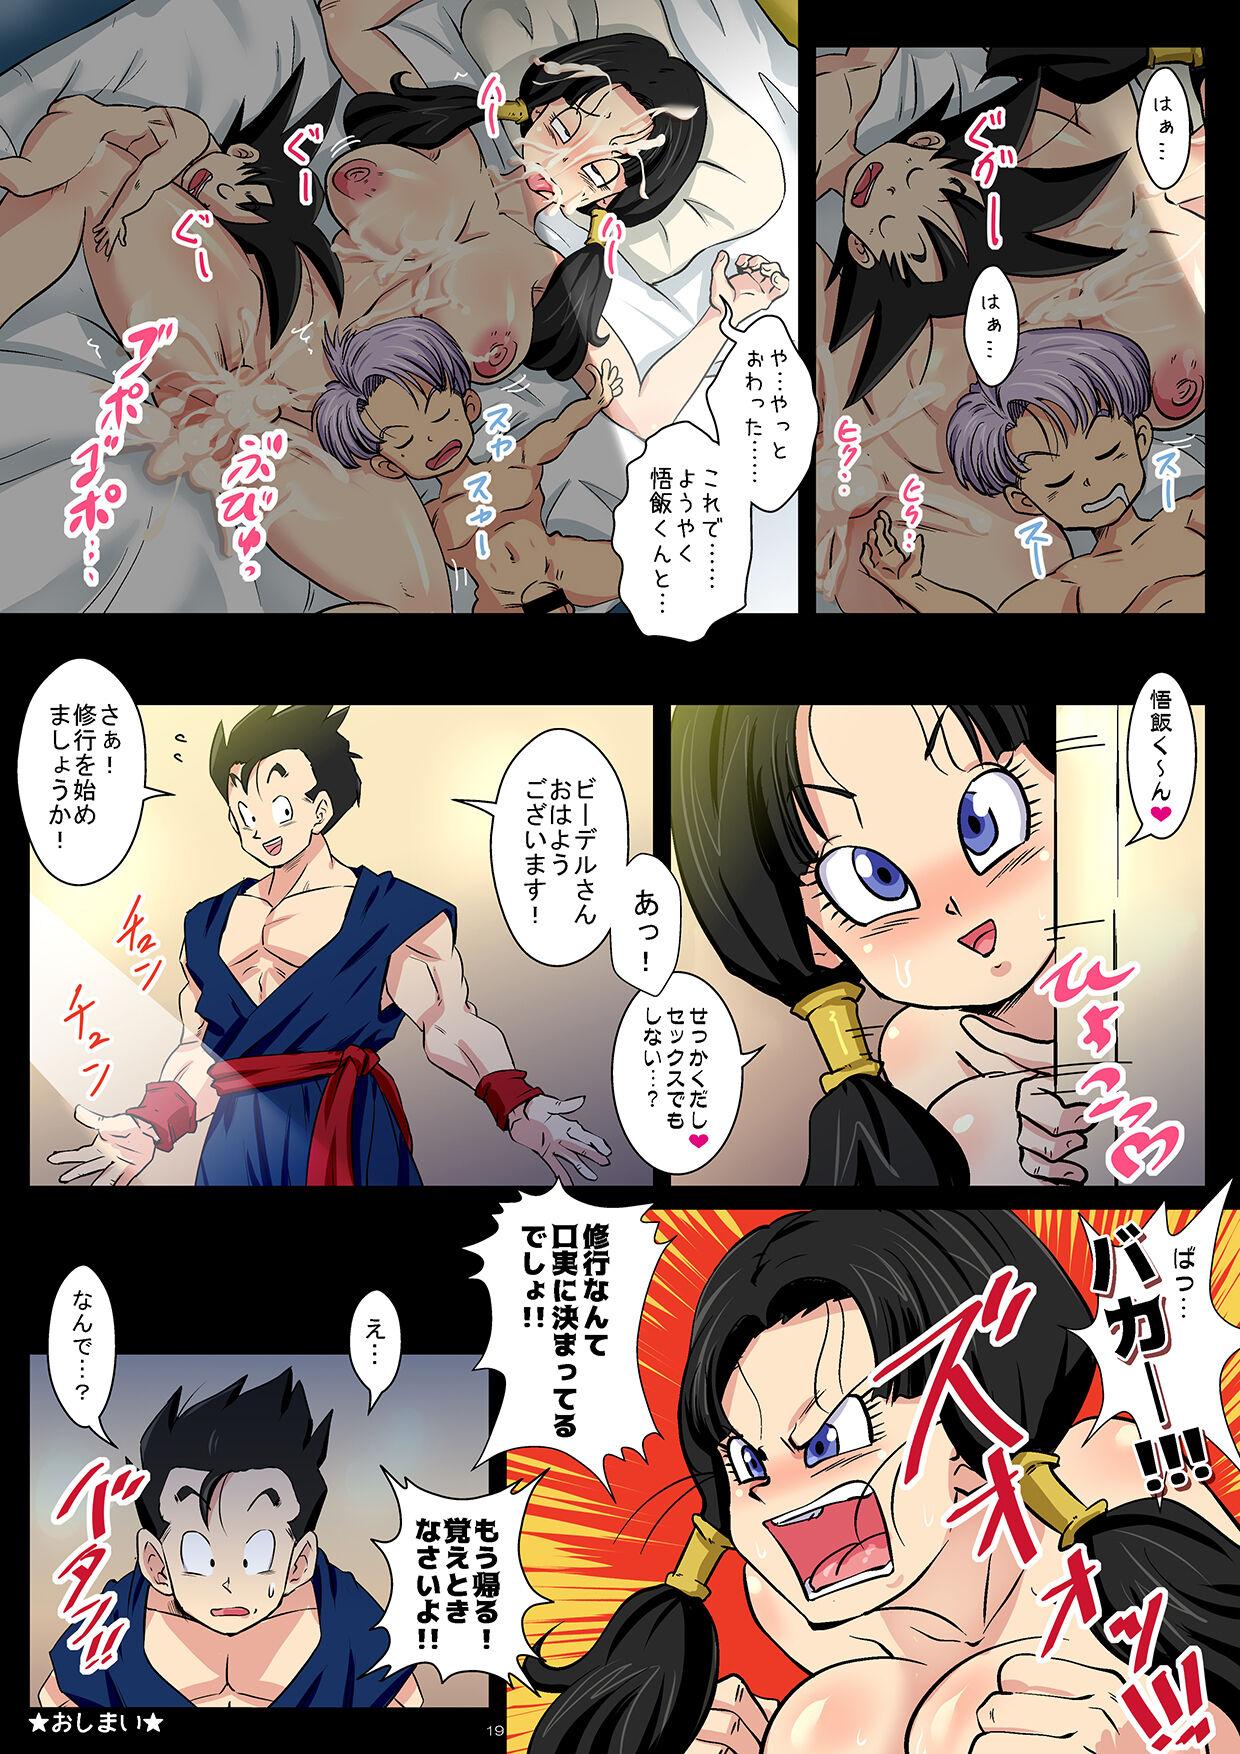 Dress Gohan is addicted to sex with Chi Chi - Dragon ball z Brunet - Page 19